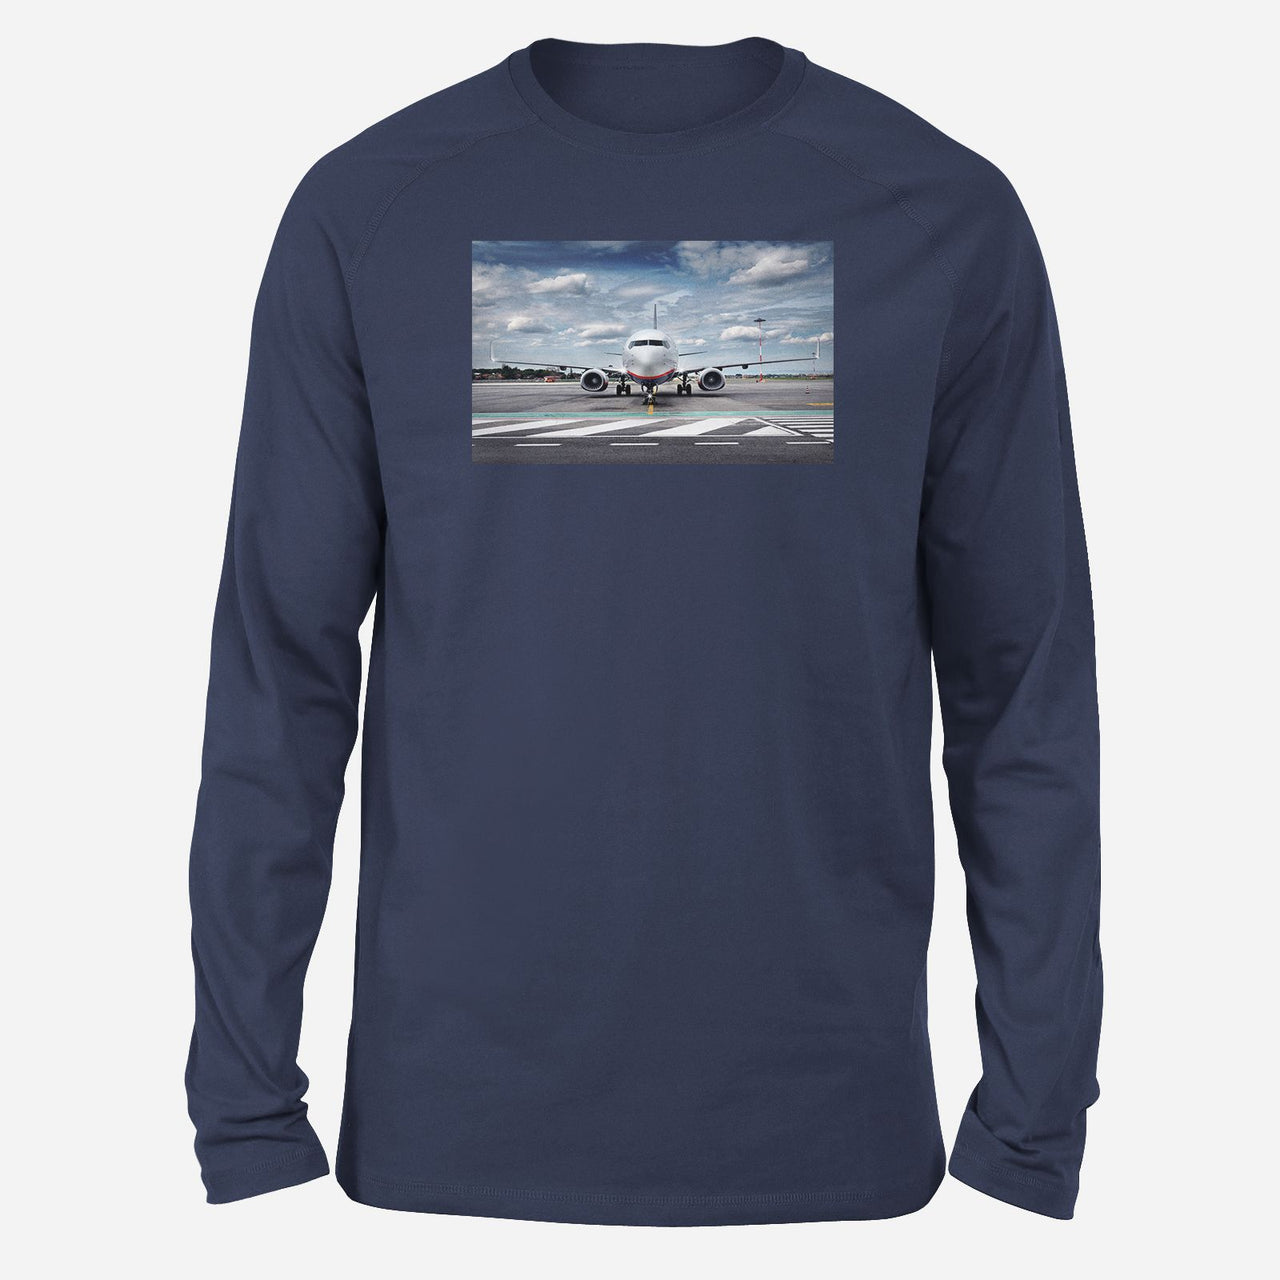 Amazing Clouds and Boeing 737 NG Designed Long-Sleeve T-Shirts